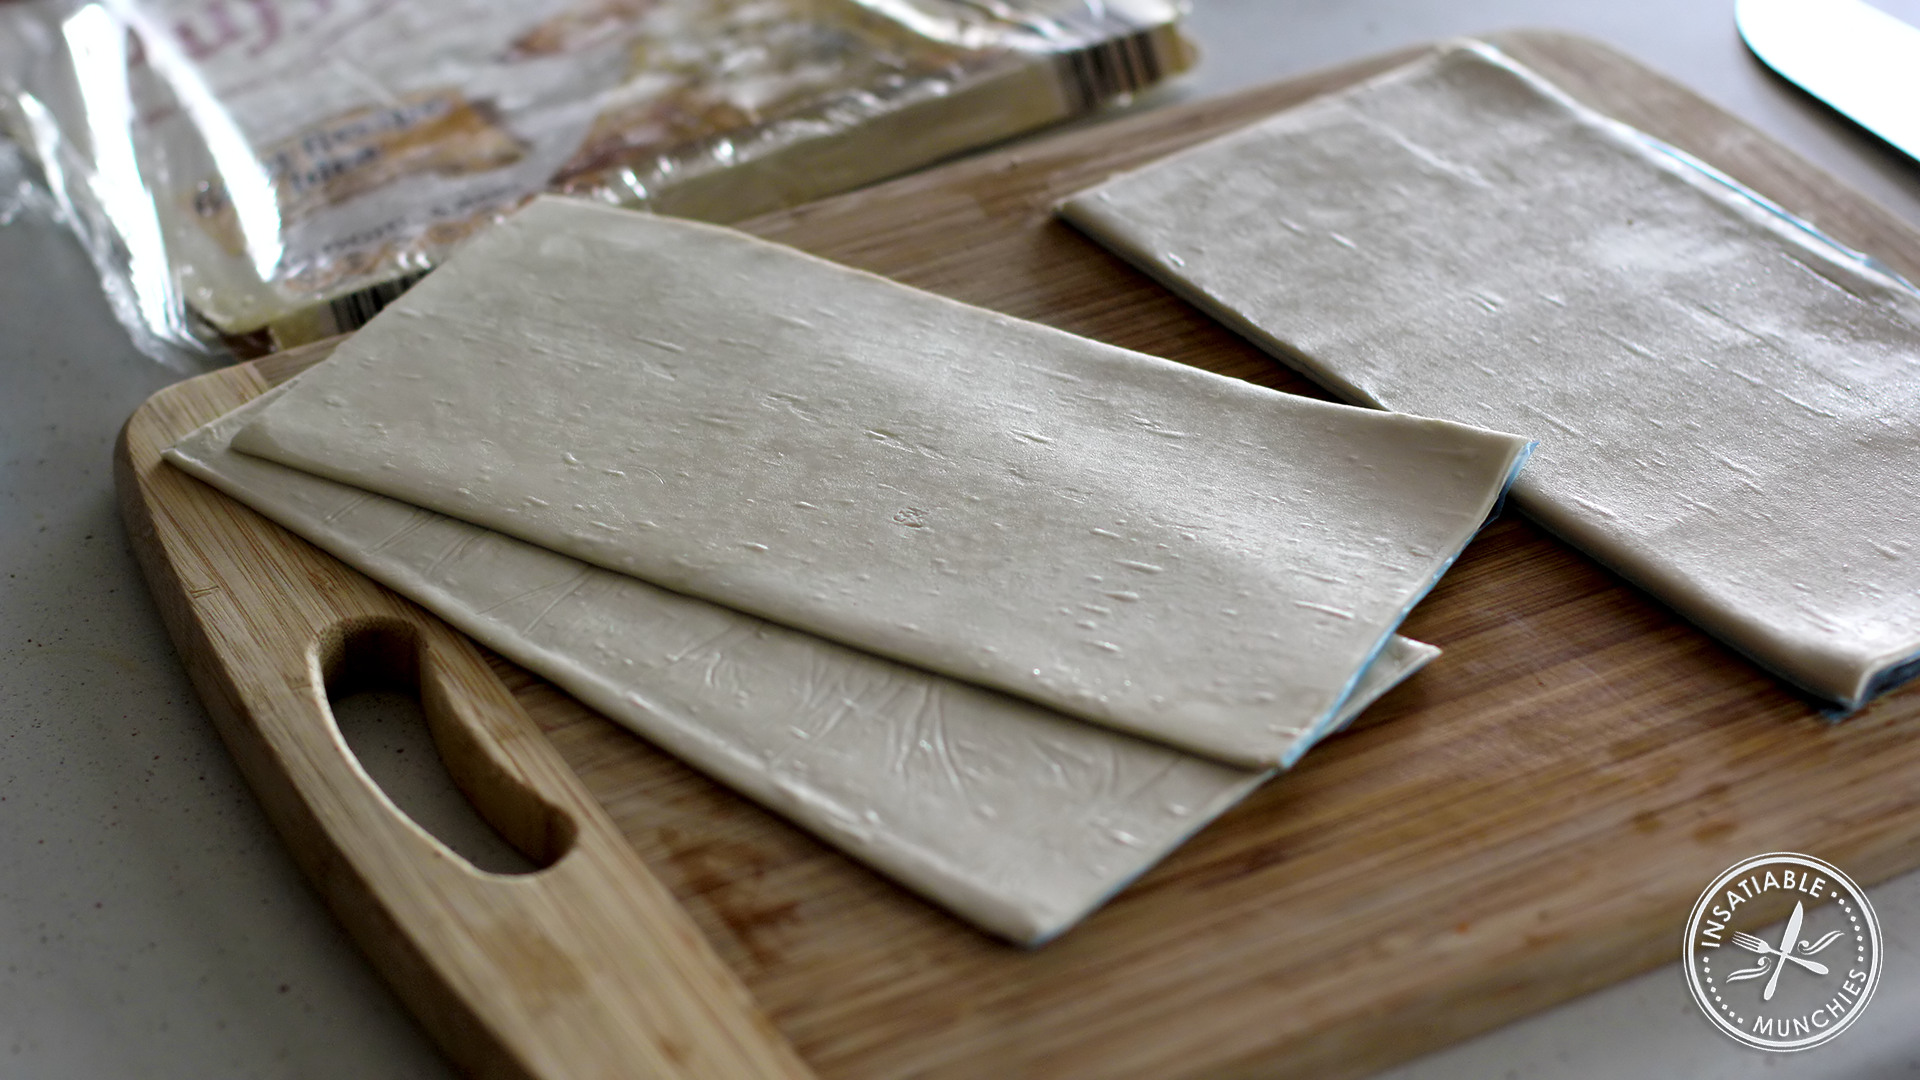 Two sheets of puff pastry that will form the top and bottom of the pie. 